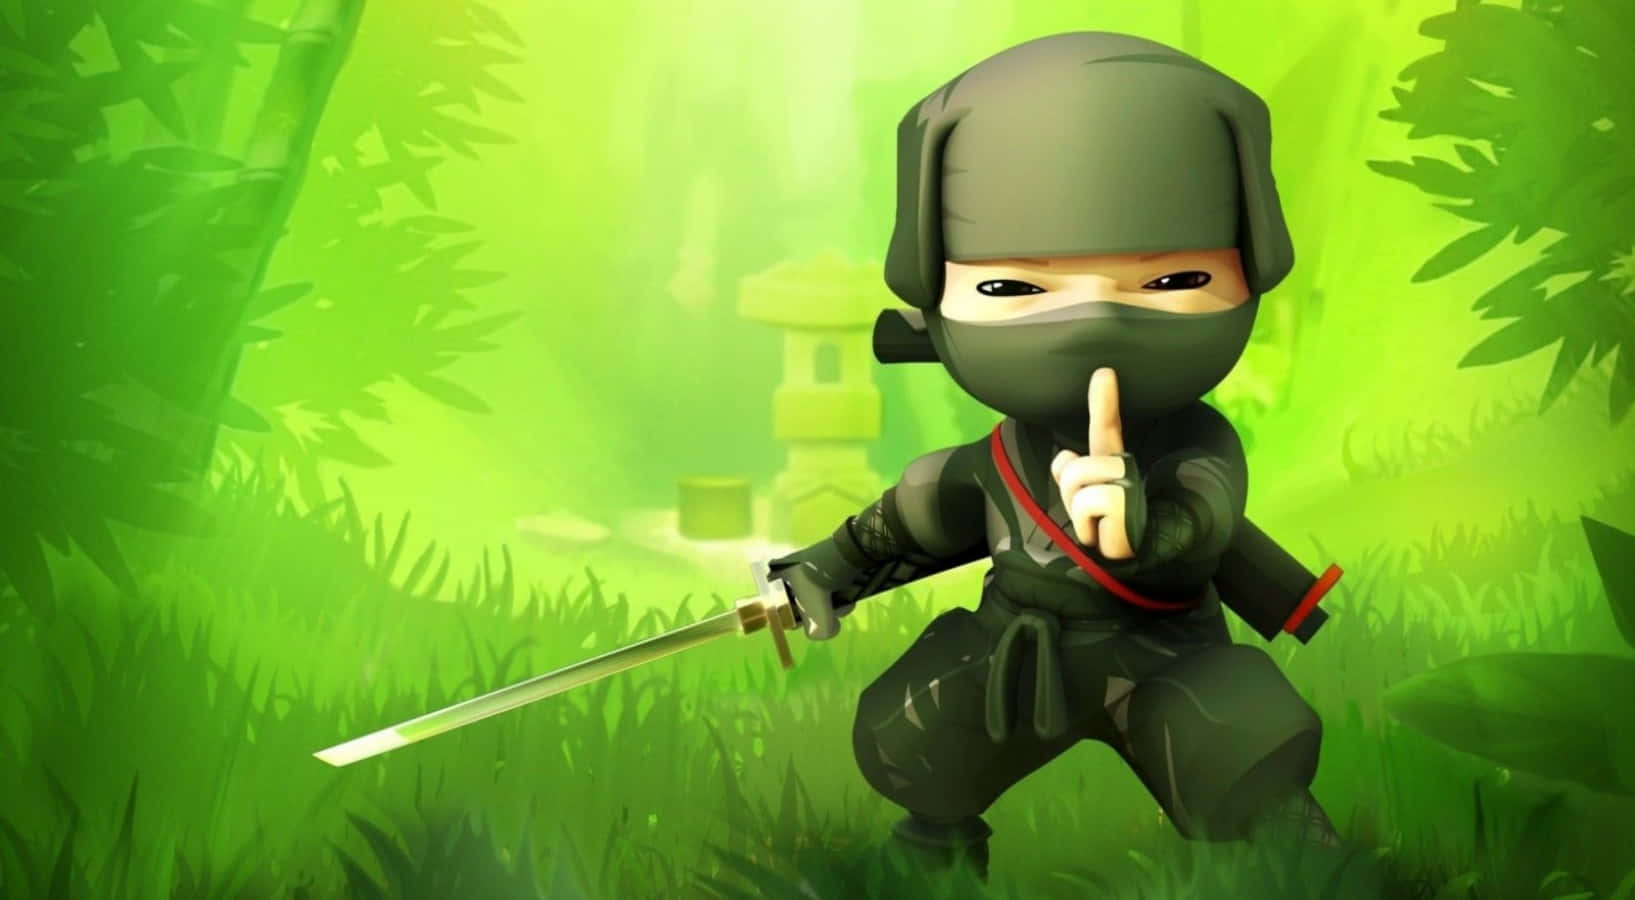 Cool And Cute Ninja In The Forest Background